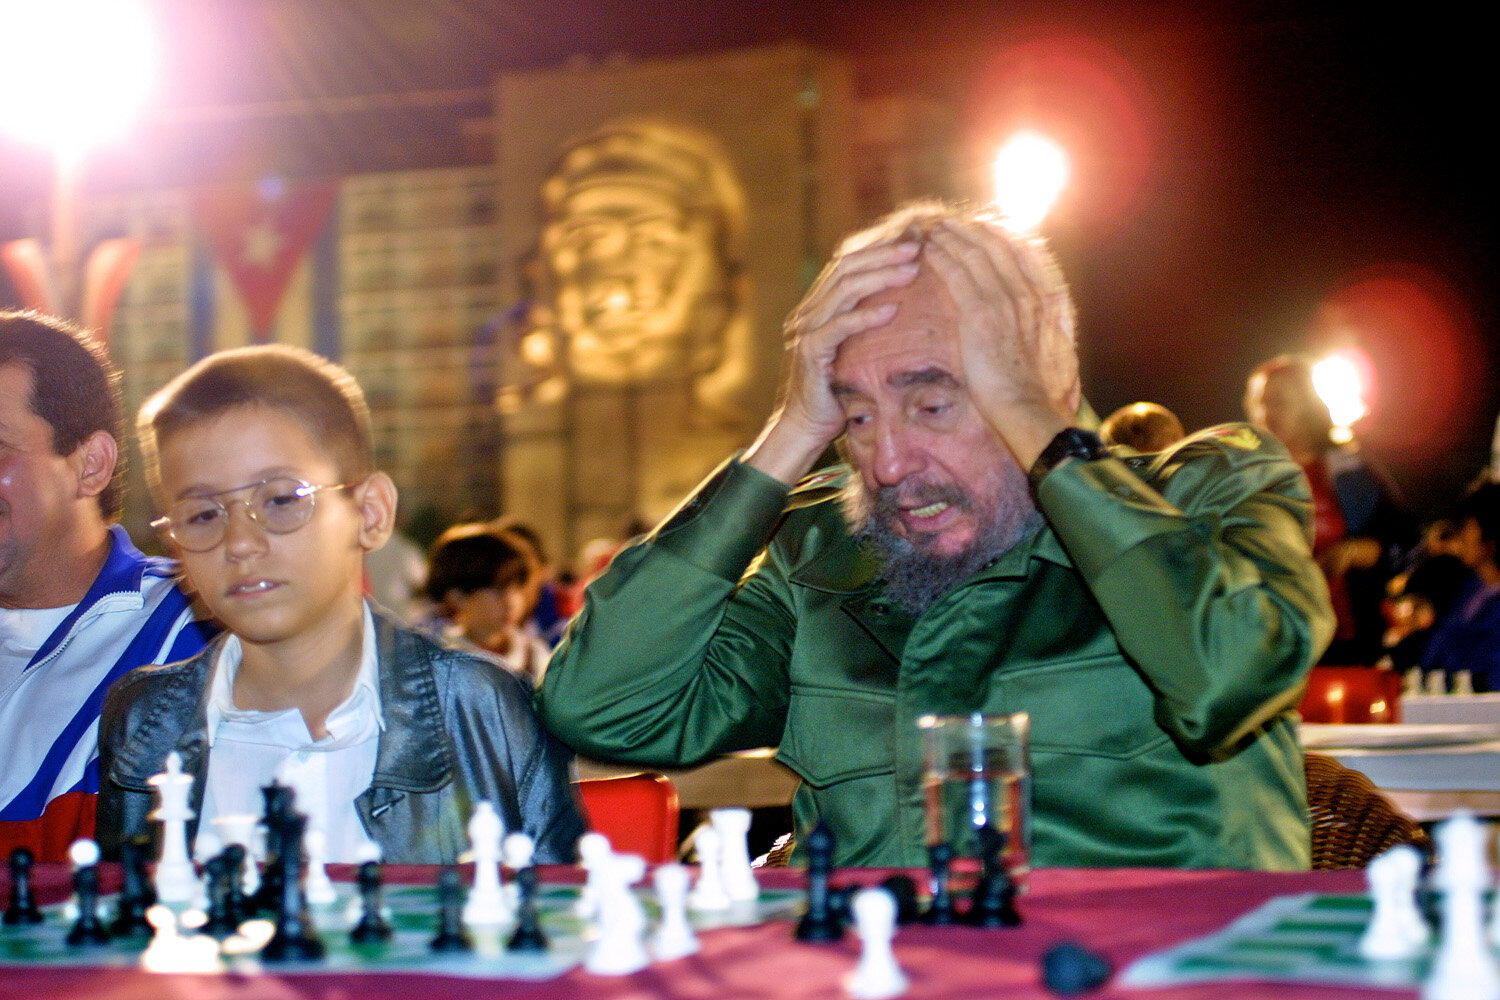  Cuba's President Fidel Castro reacts  during a chess tournament  at the Plaza de la Revolucion, against the backdrop of an image of Che Guevara, on December 7, 2002, in Havana, Cuba. Next to Castro is young Lazaro Castro (not related to Fidel Castro